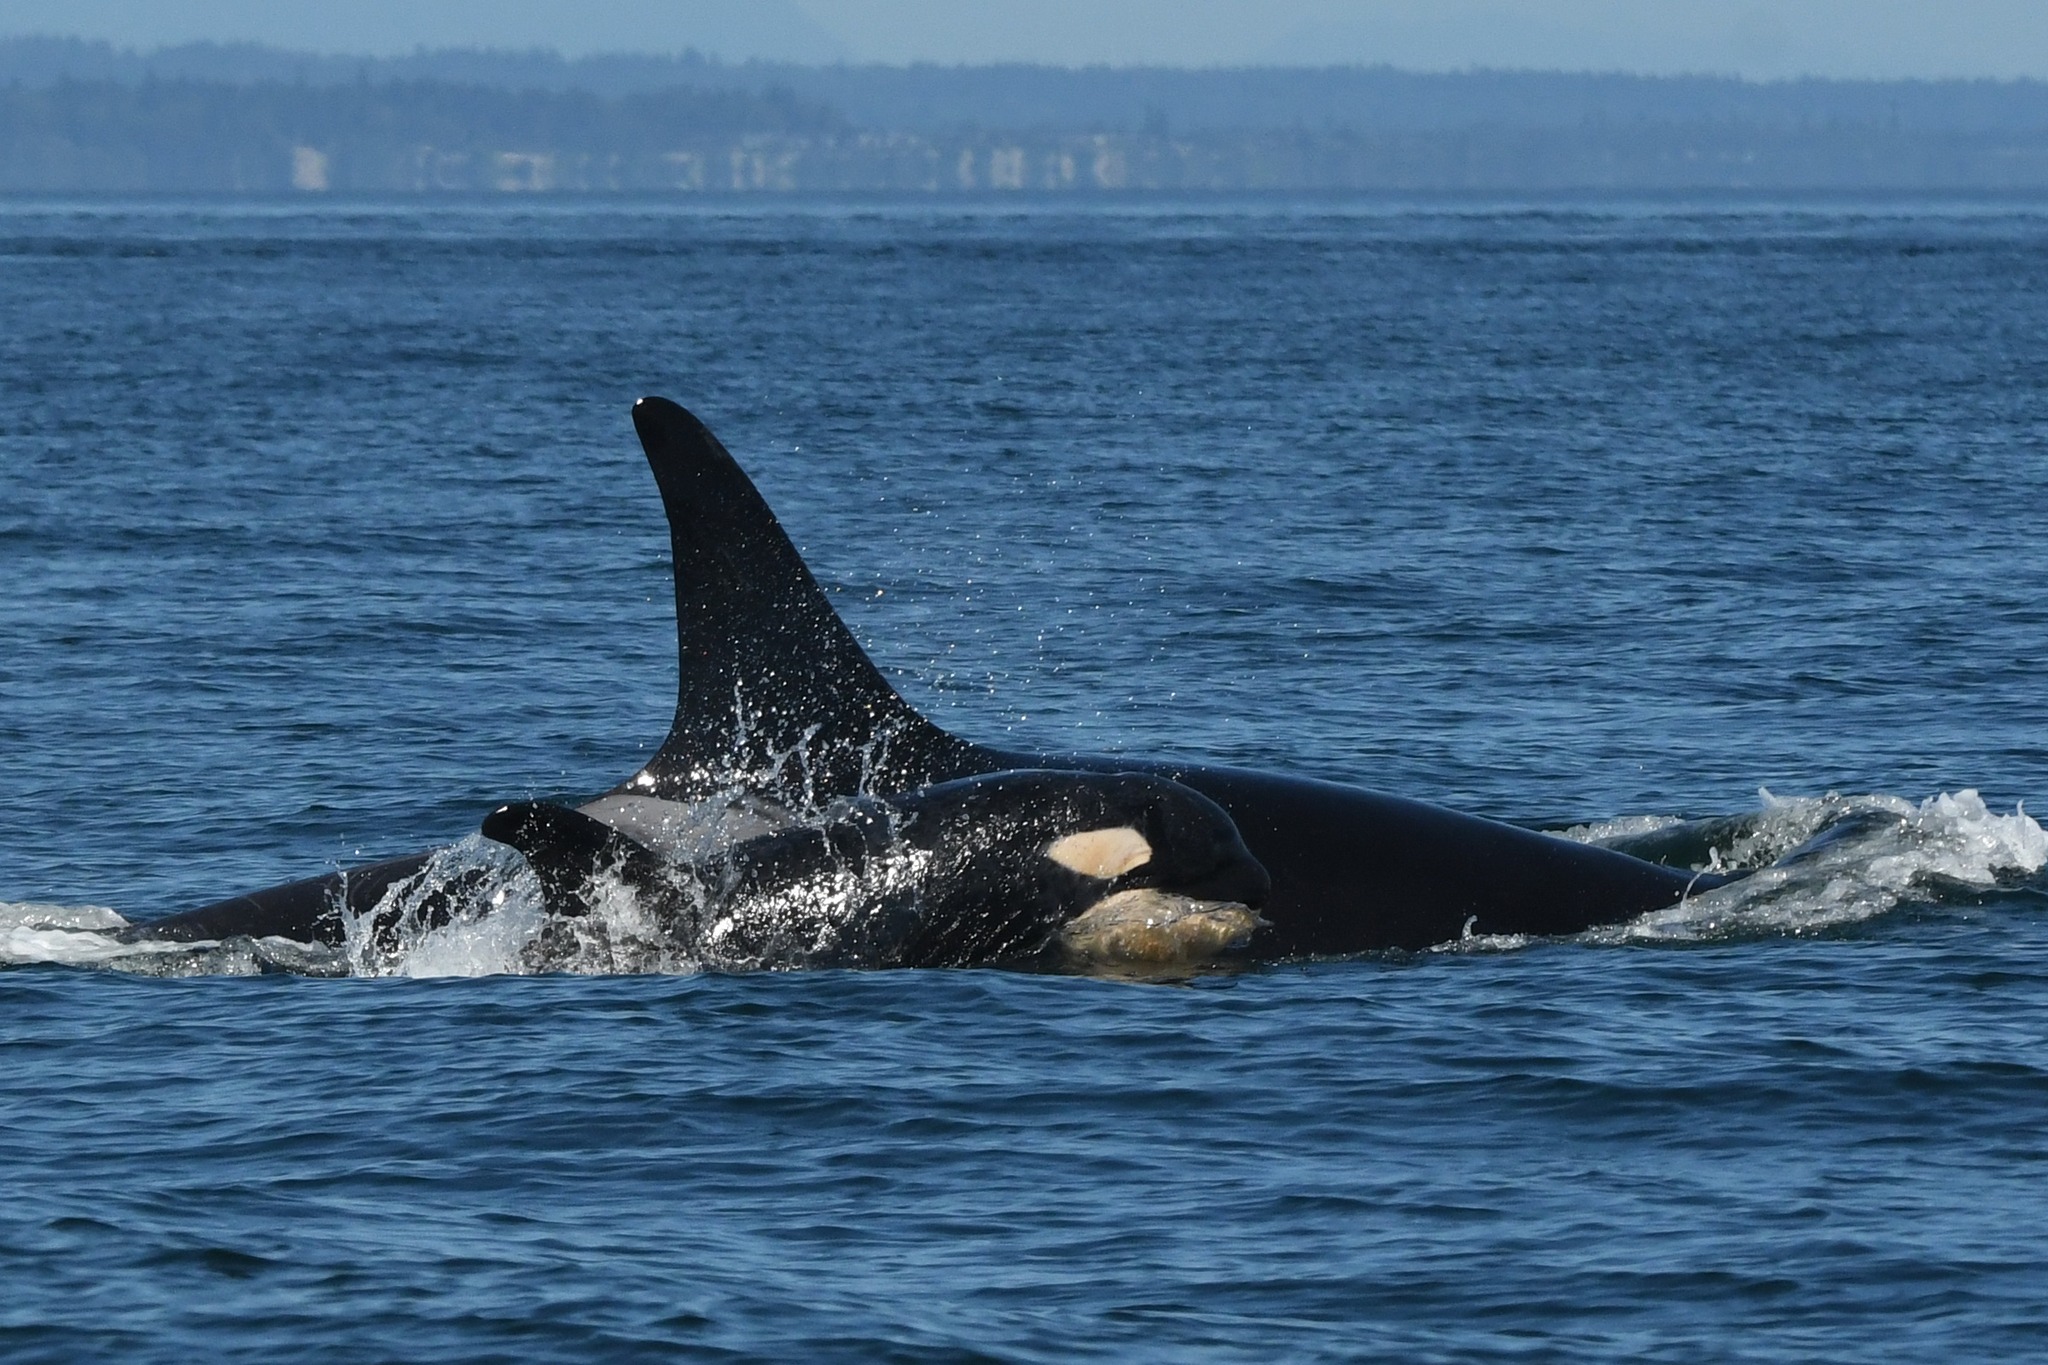 Trawl vessels caught 10 killer whales in 23 off Alaska federal